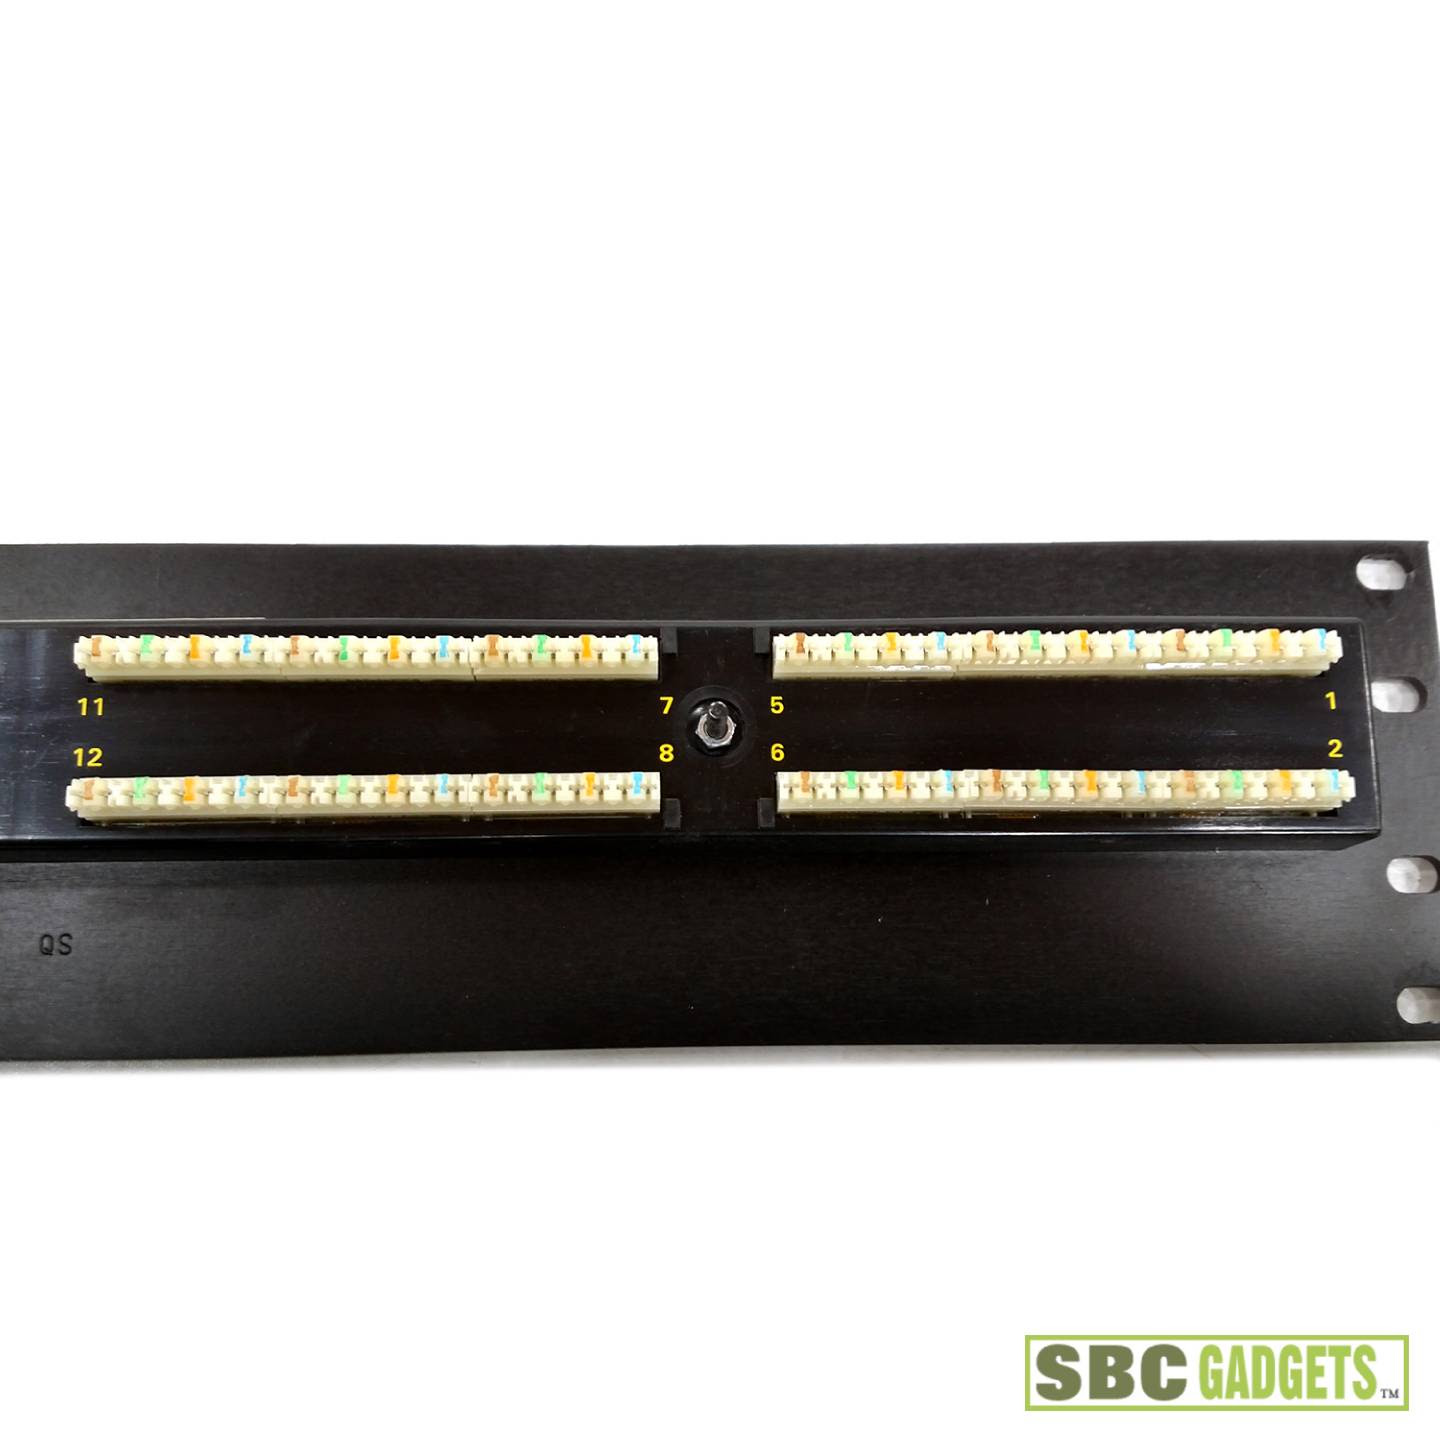 Adc Video Patch Panel Label Template For Adc Video Patch Panel Label Template